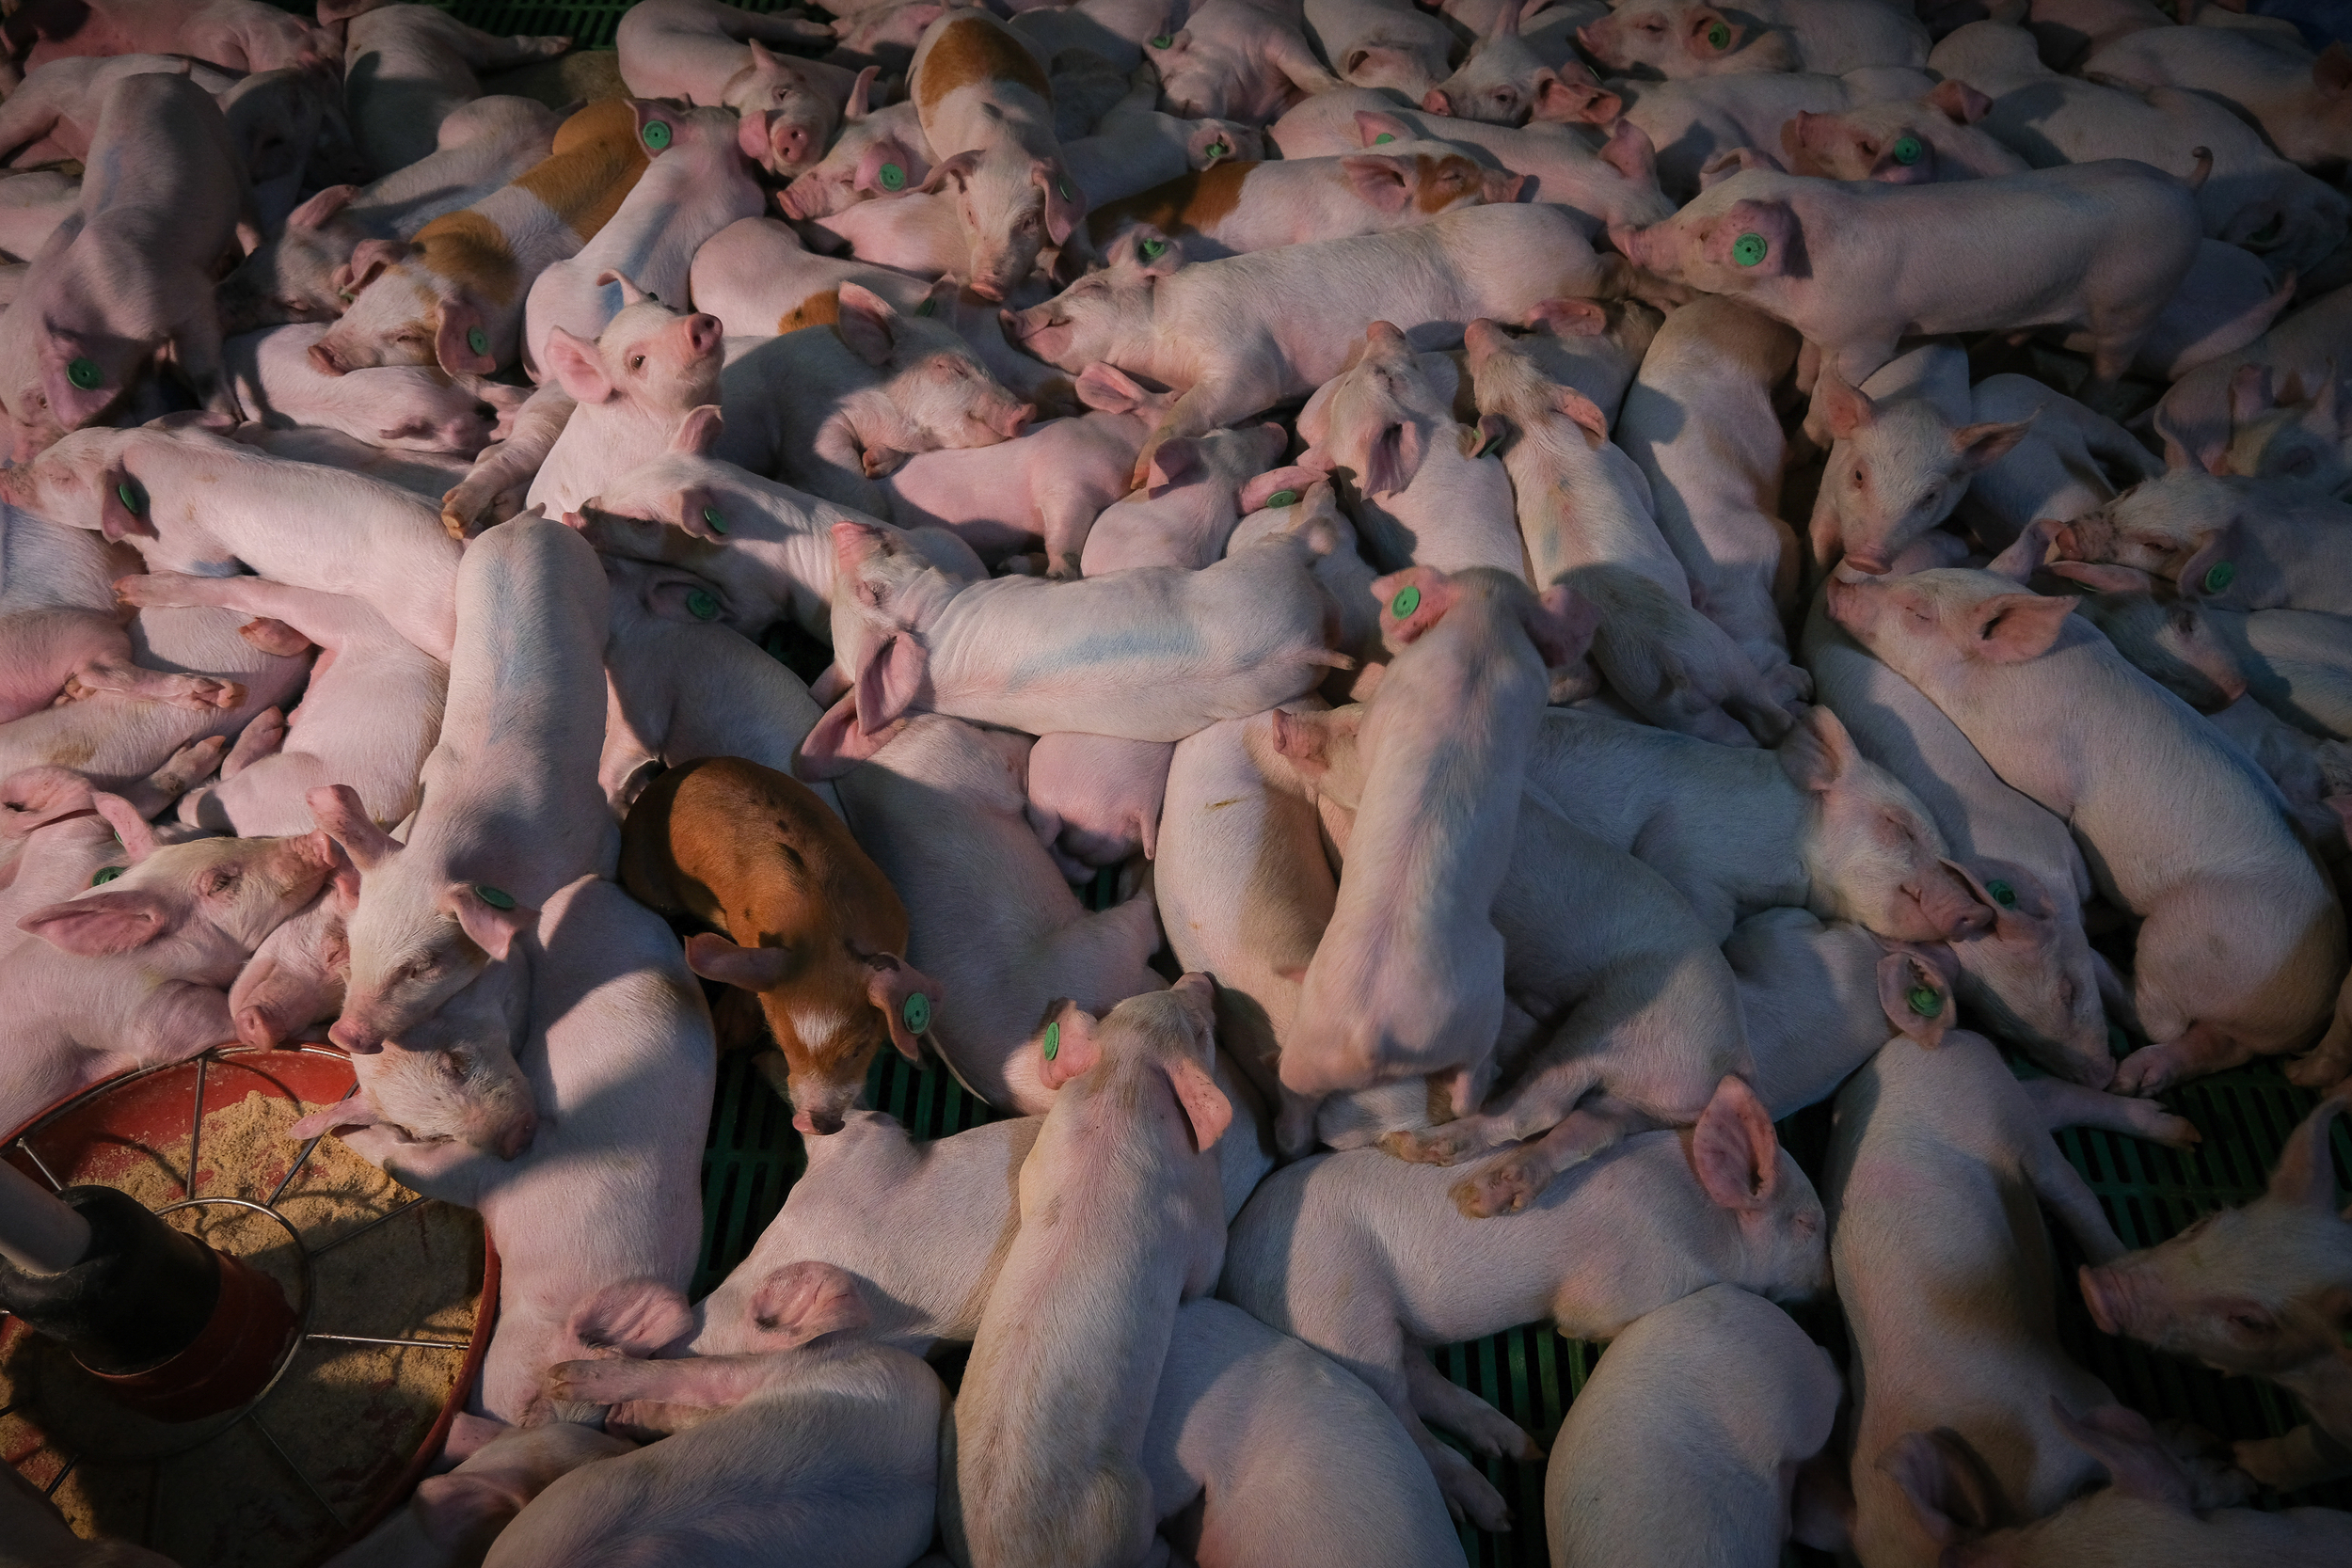 Pigs crowded into a dimly-lit shed. They're packed so tightly that some are lying on top of others, and you can't see the floor.